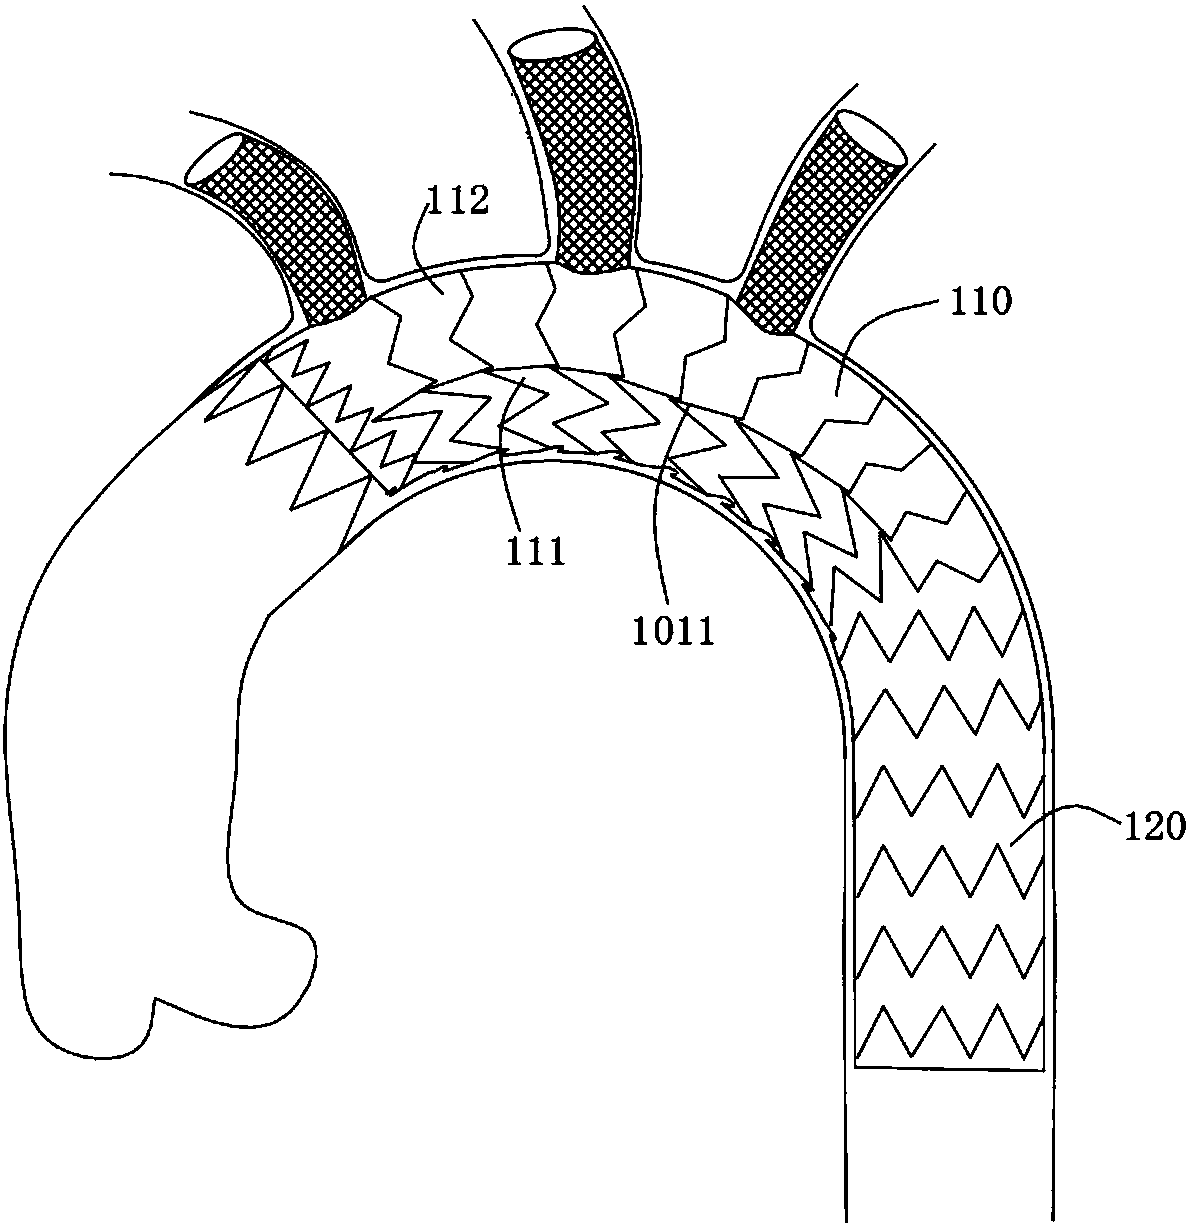 Covered stent